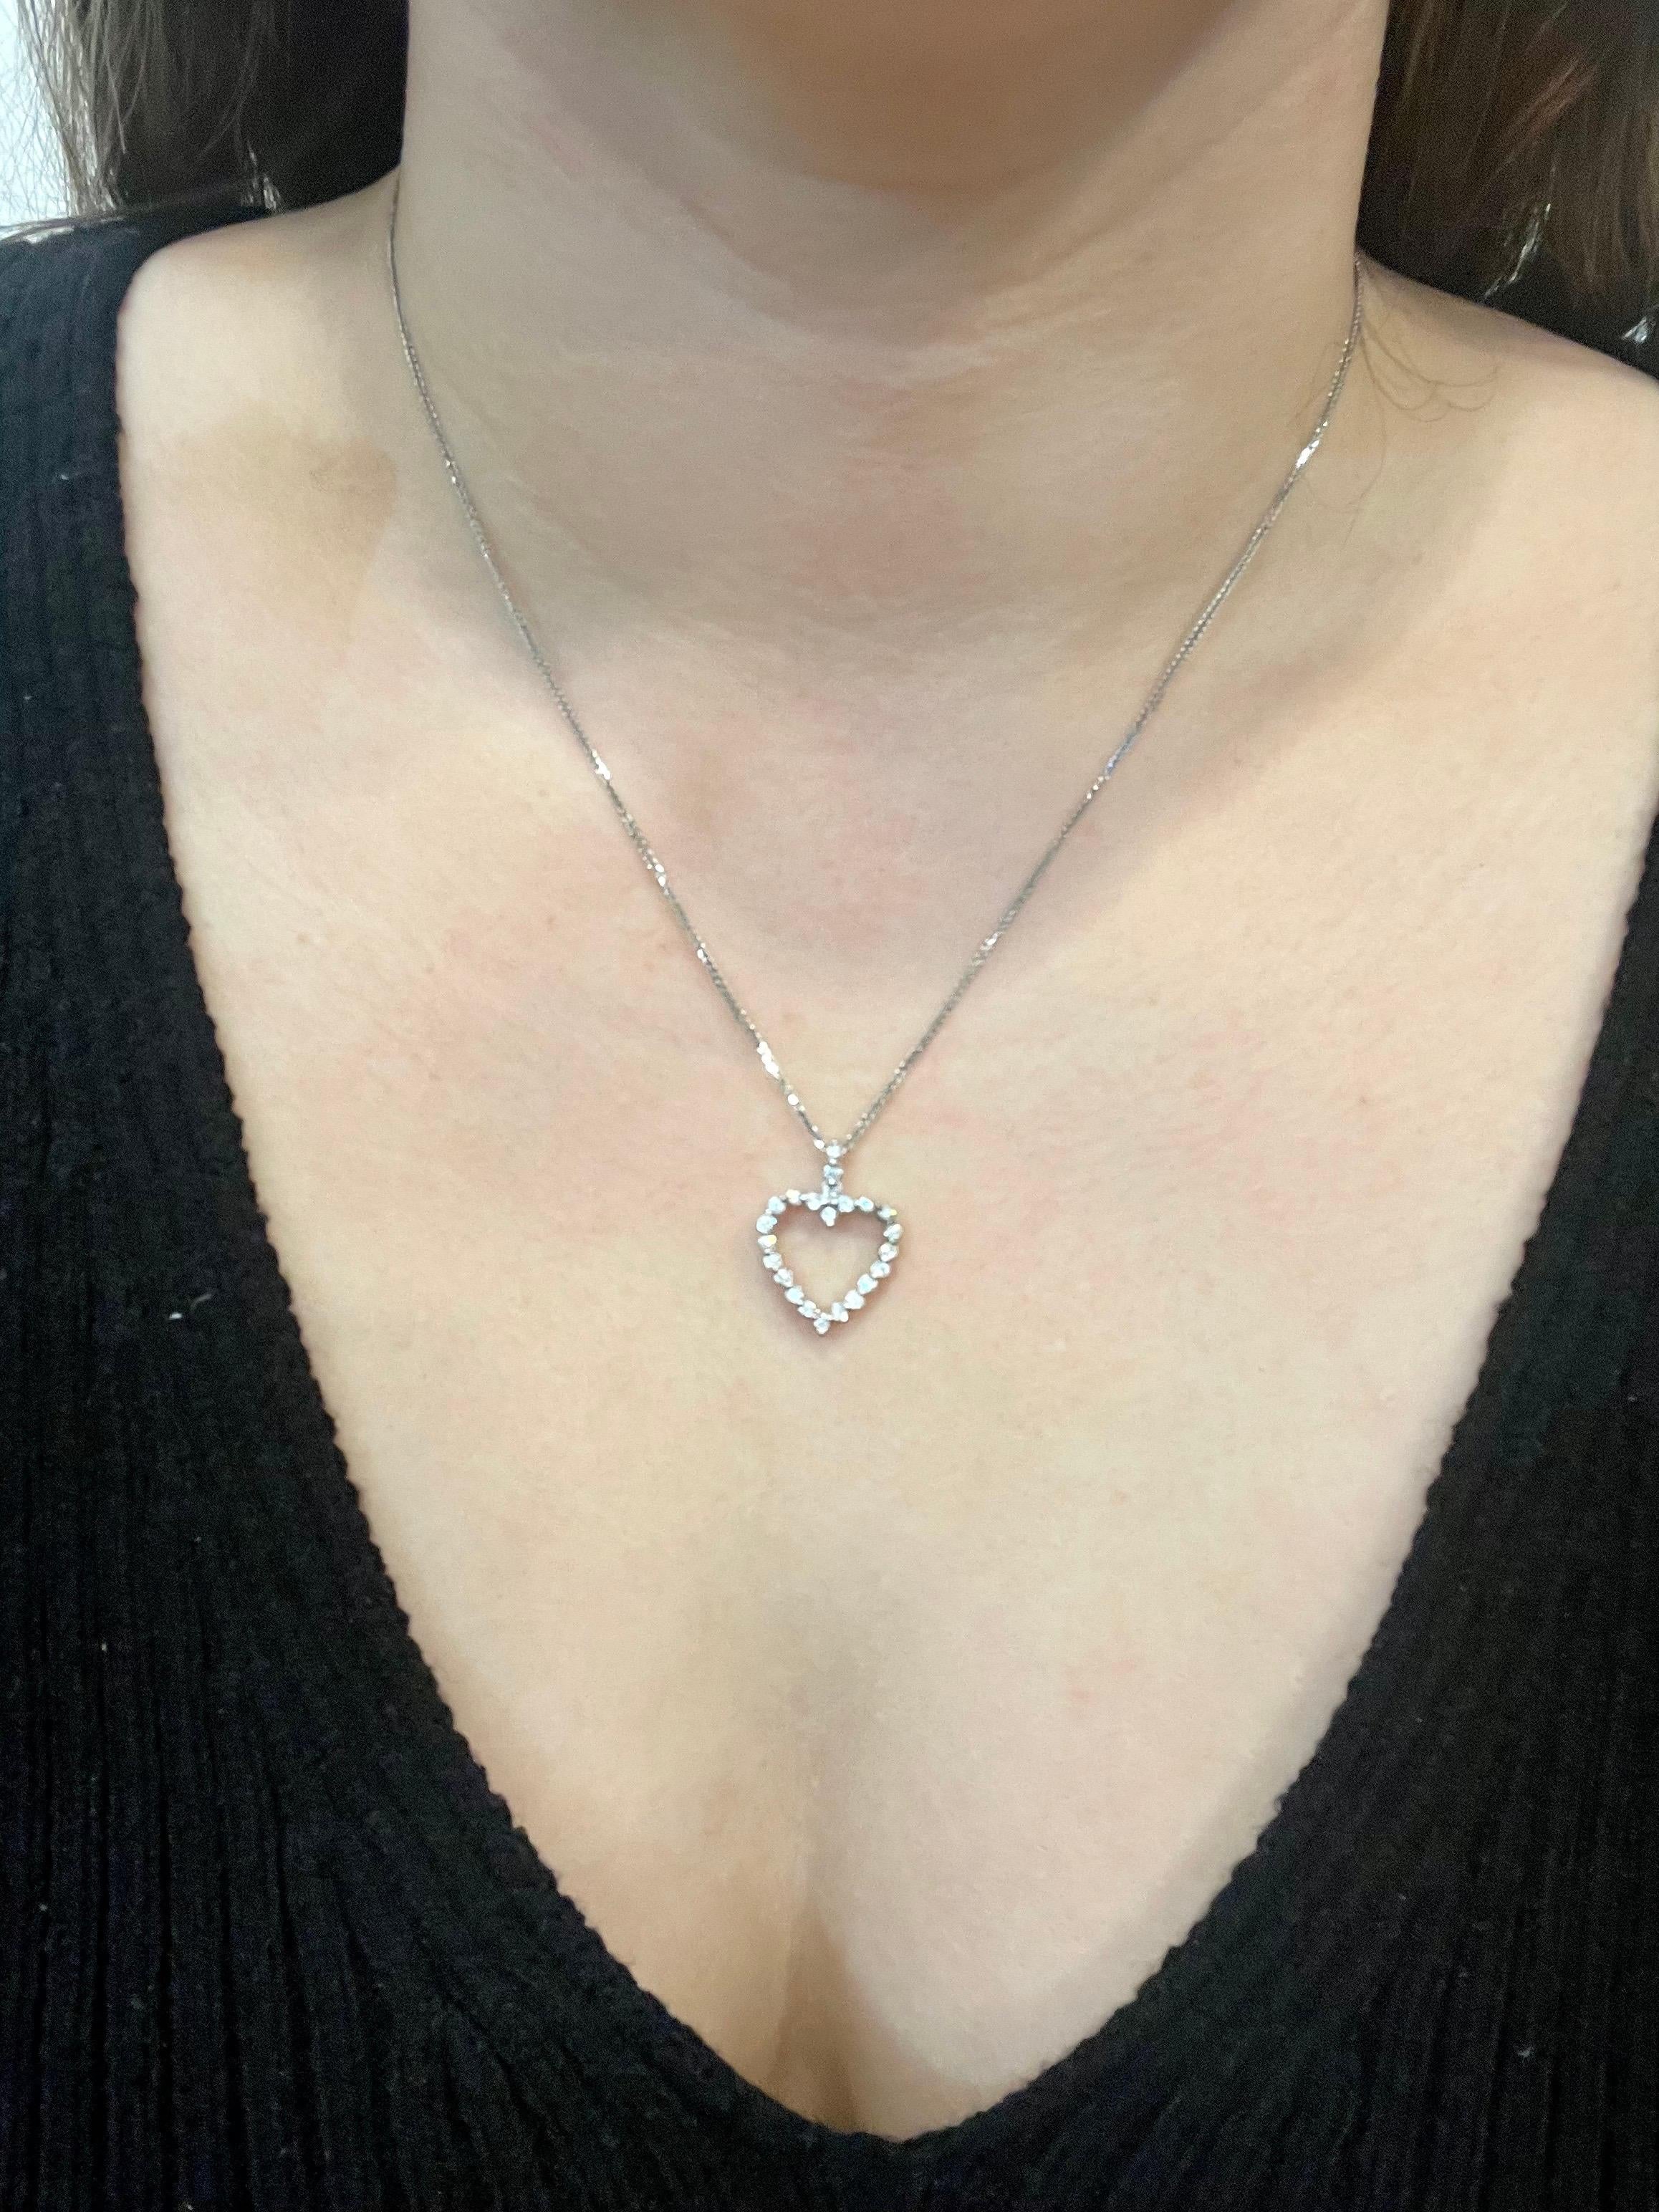 1 Carat Diamond Heart Pendant/ Necklace 14 Karat White Gold with Chain For Sale 6